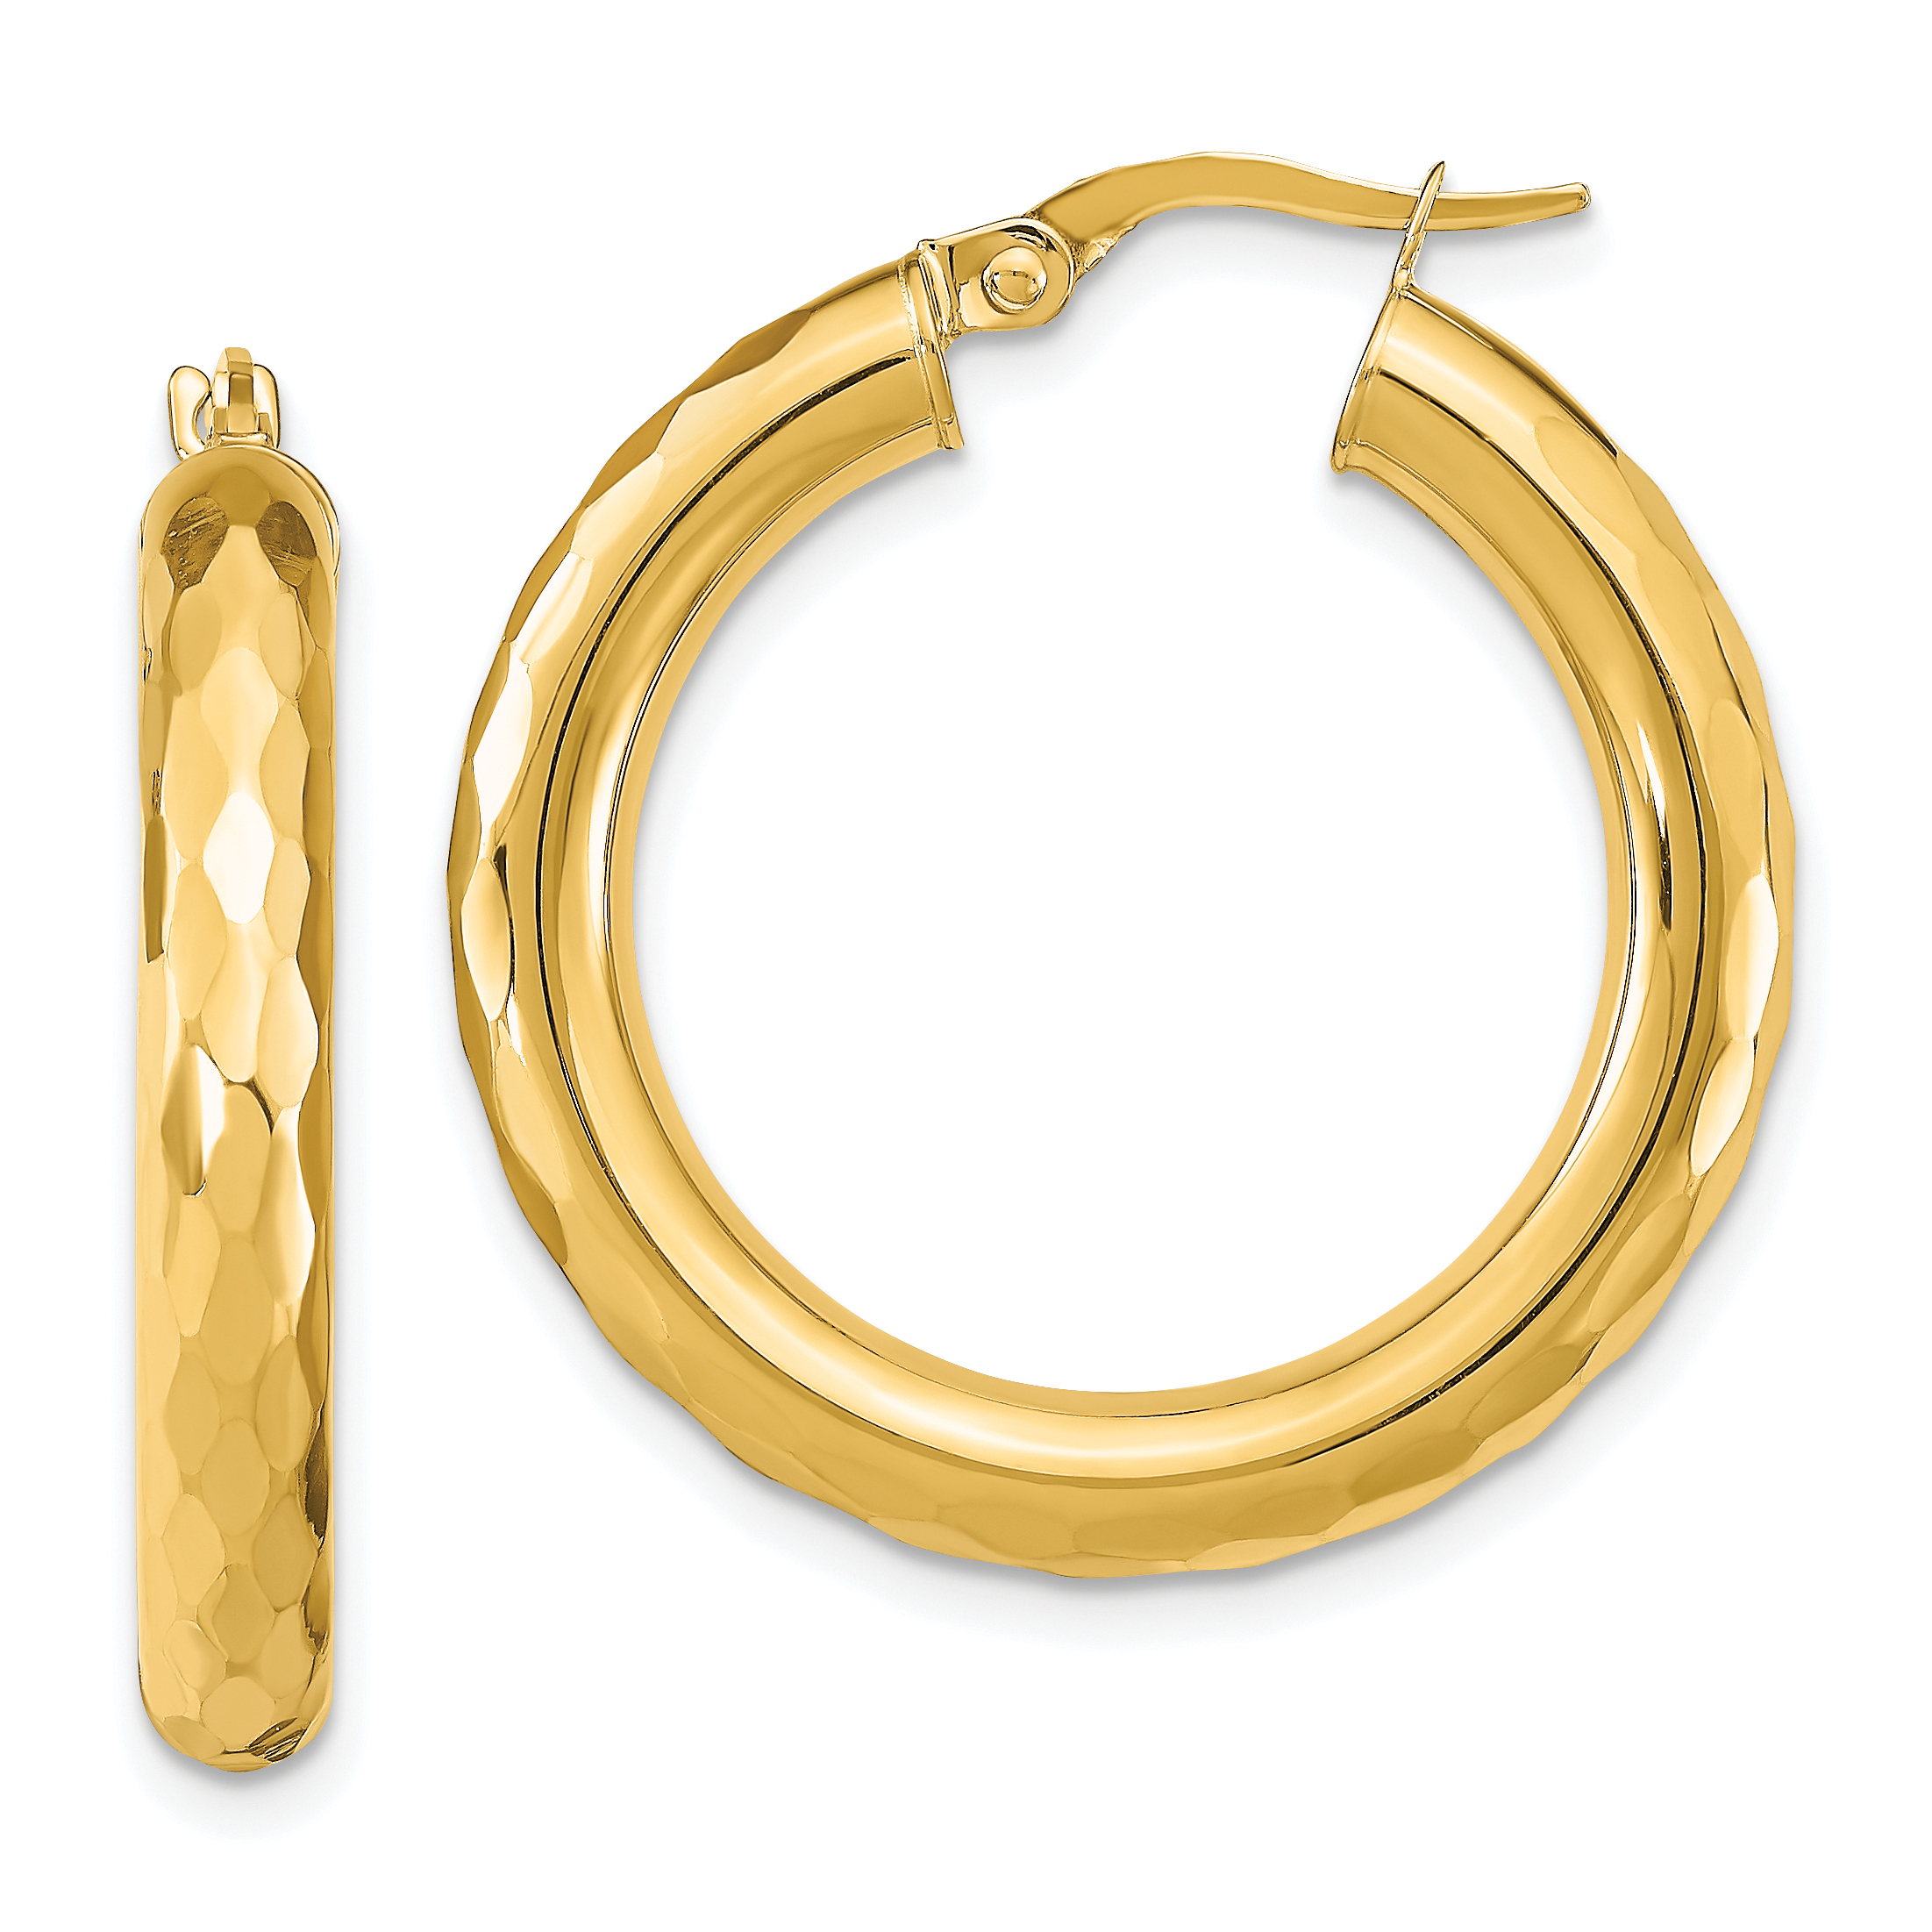 Buy Cute First Quality Gold Plated Ad Stone Small Size Hoop Earrings for  Girls